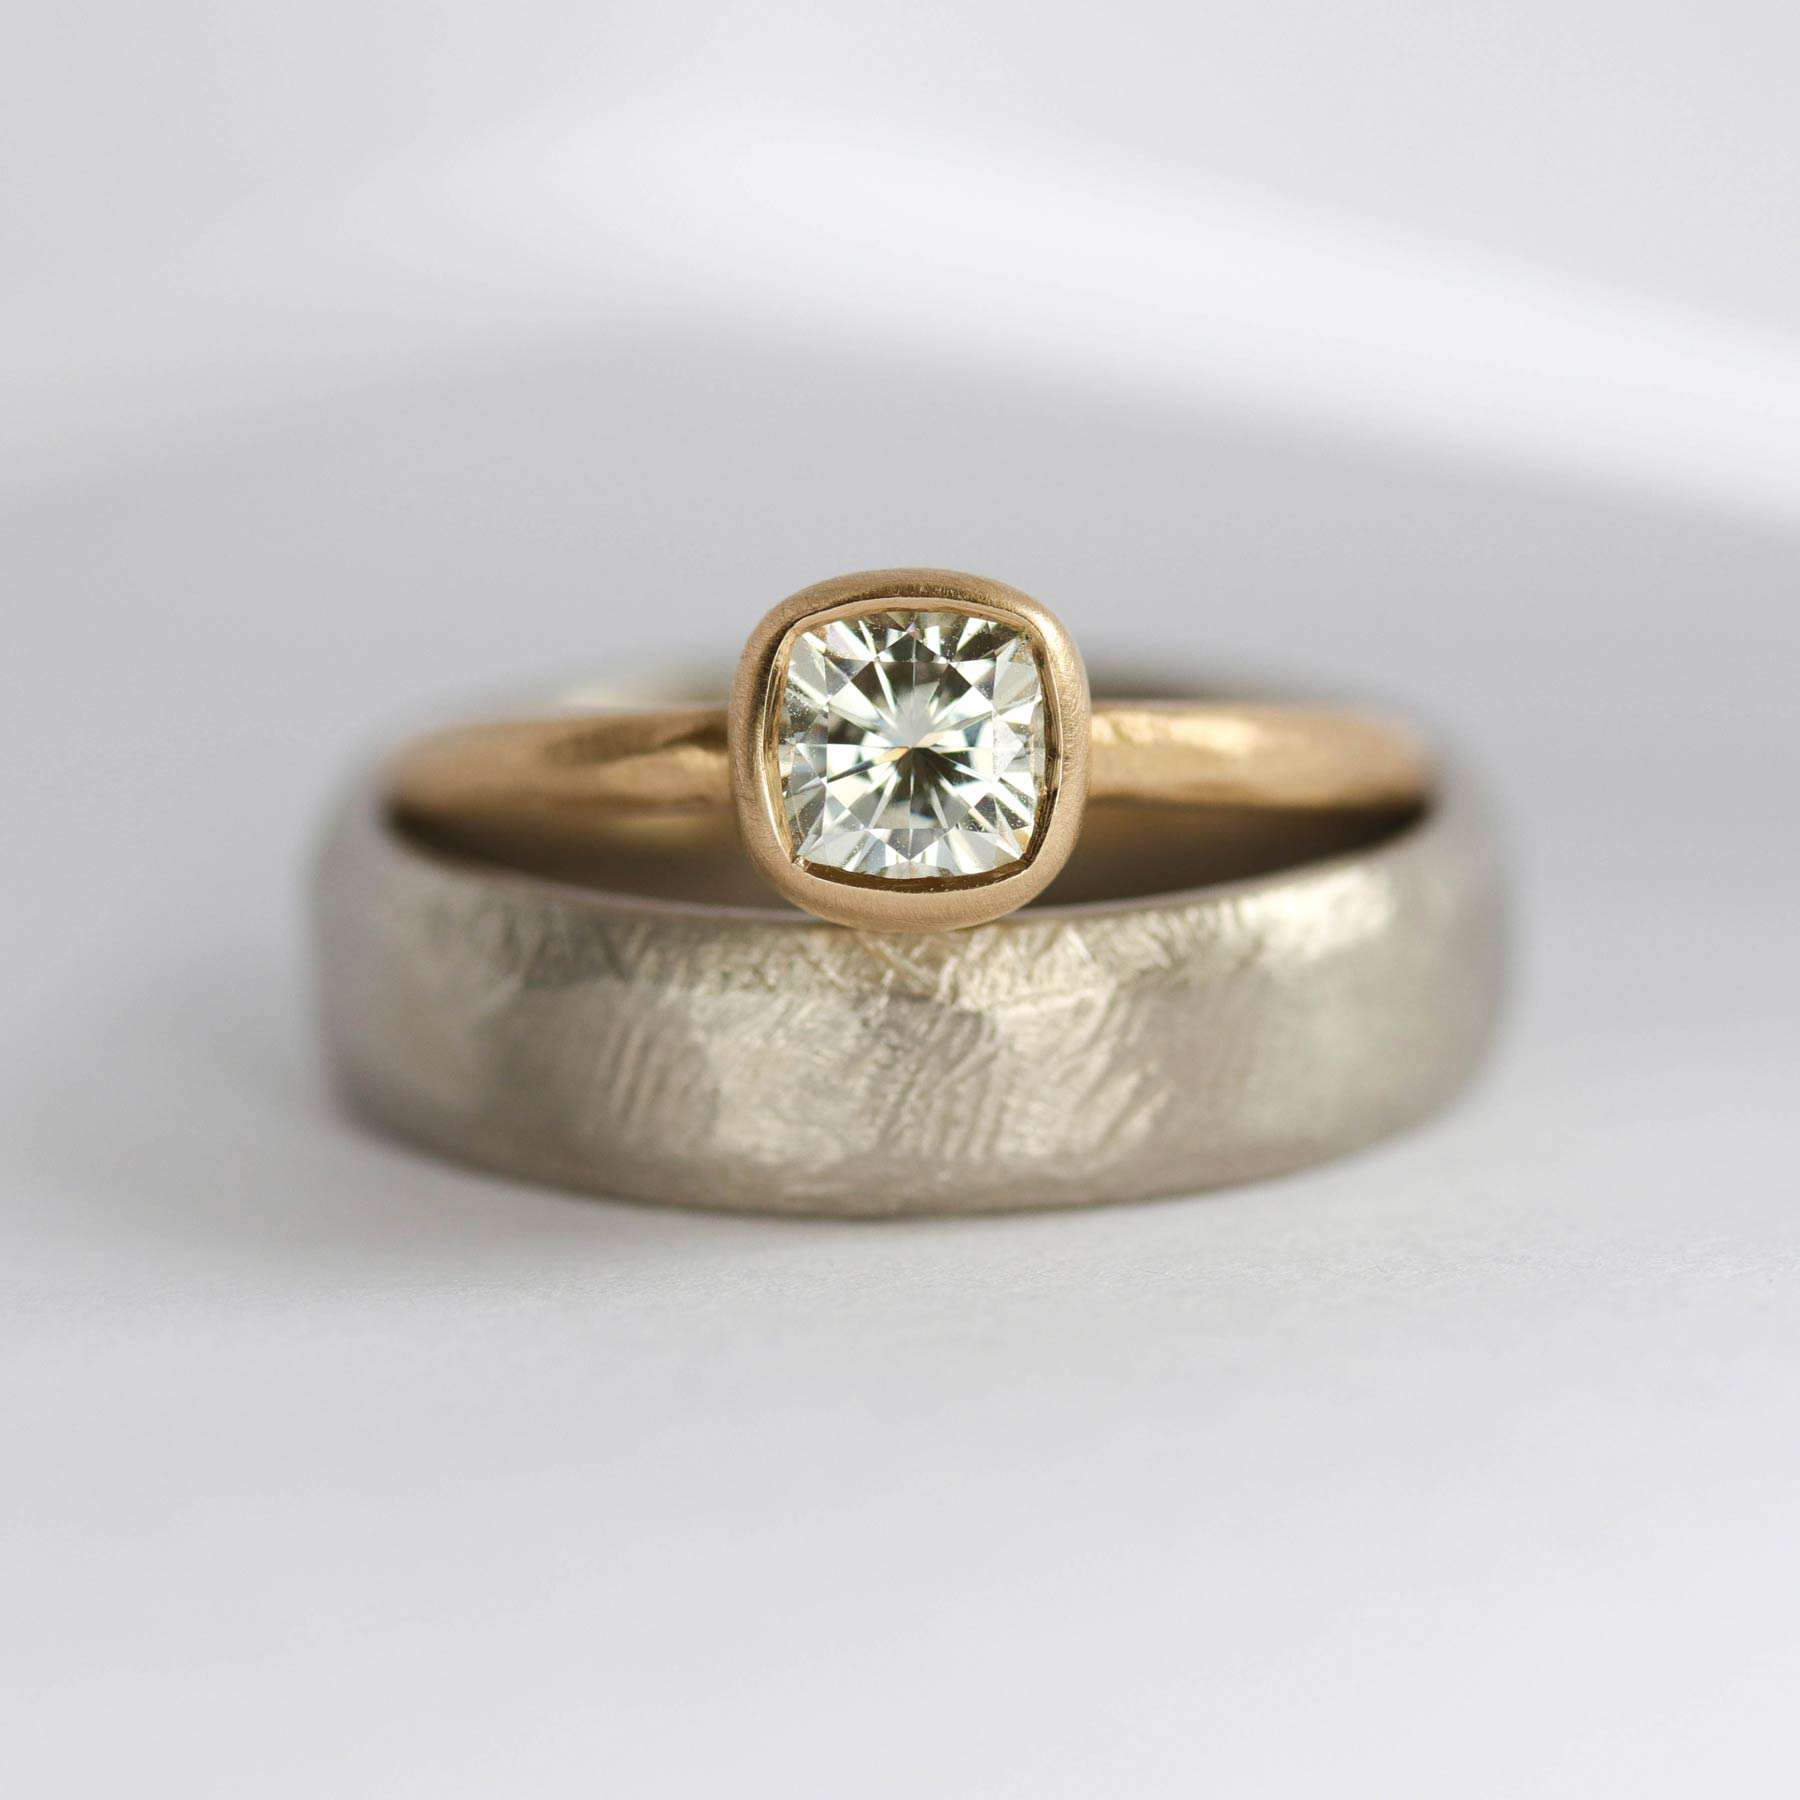 ethical jewellery design conflict free diamonds recycled precious metals